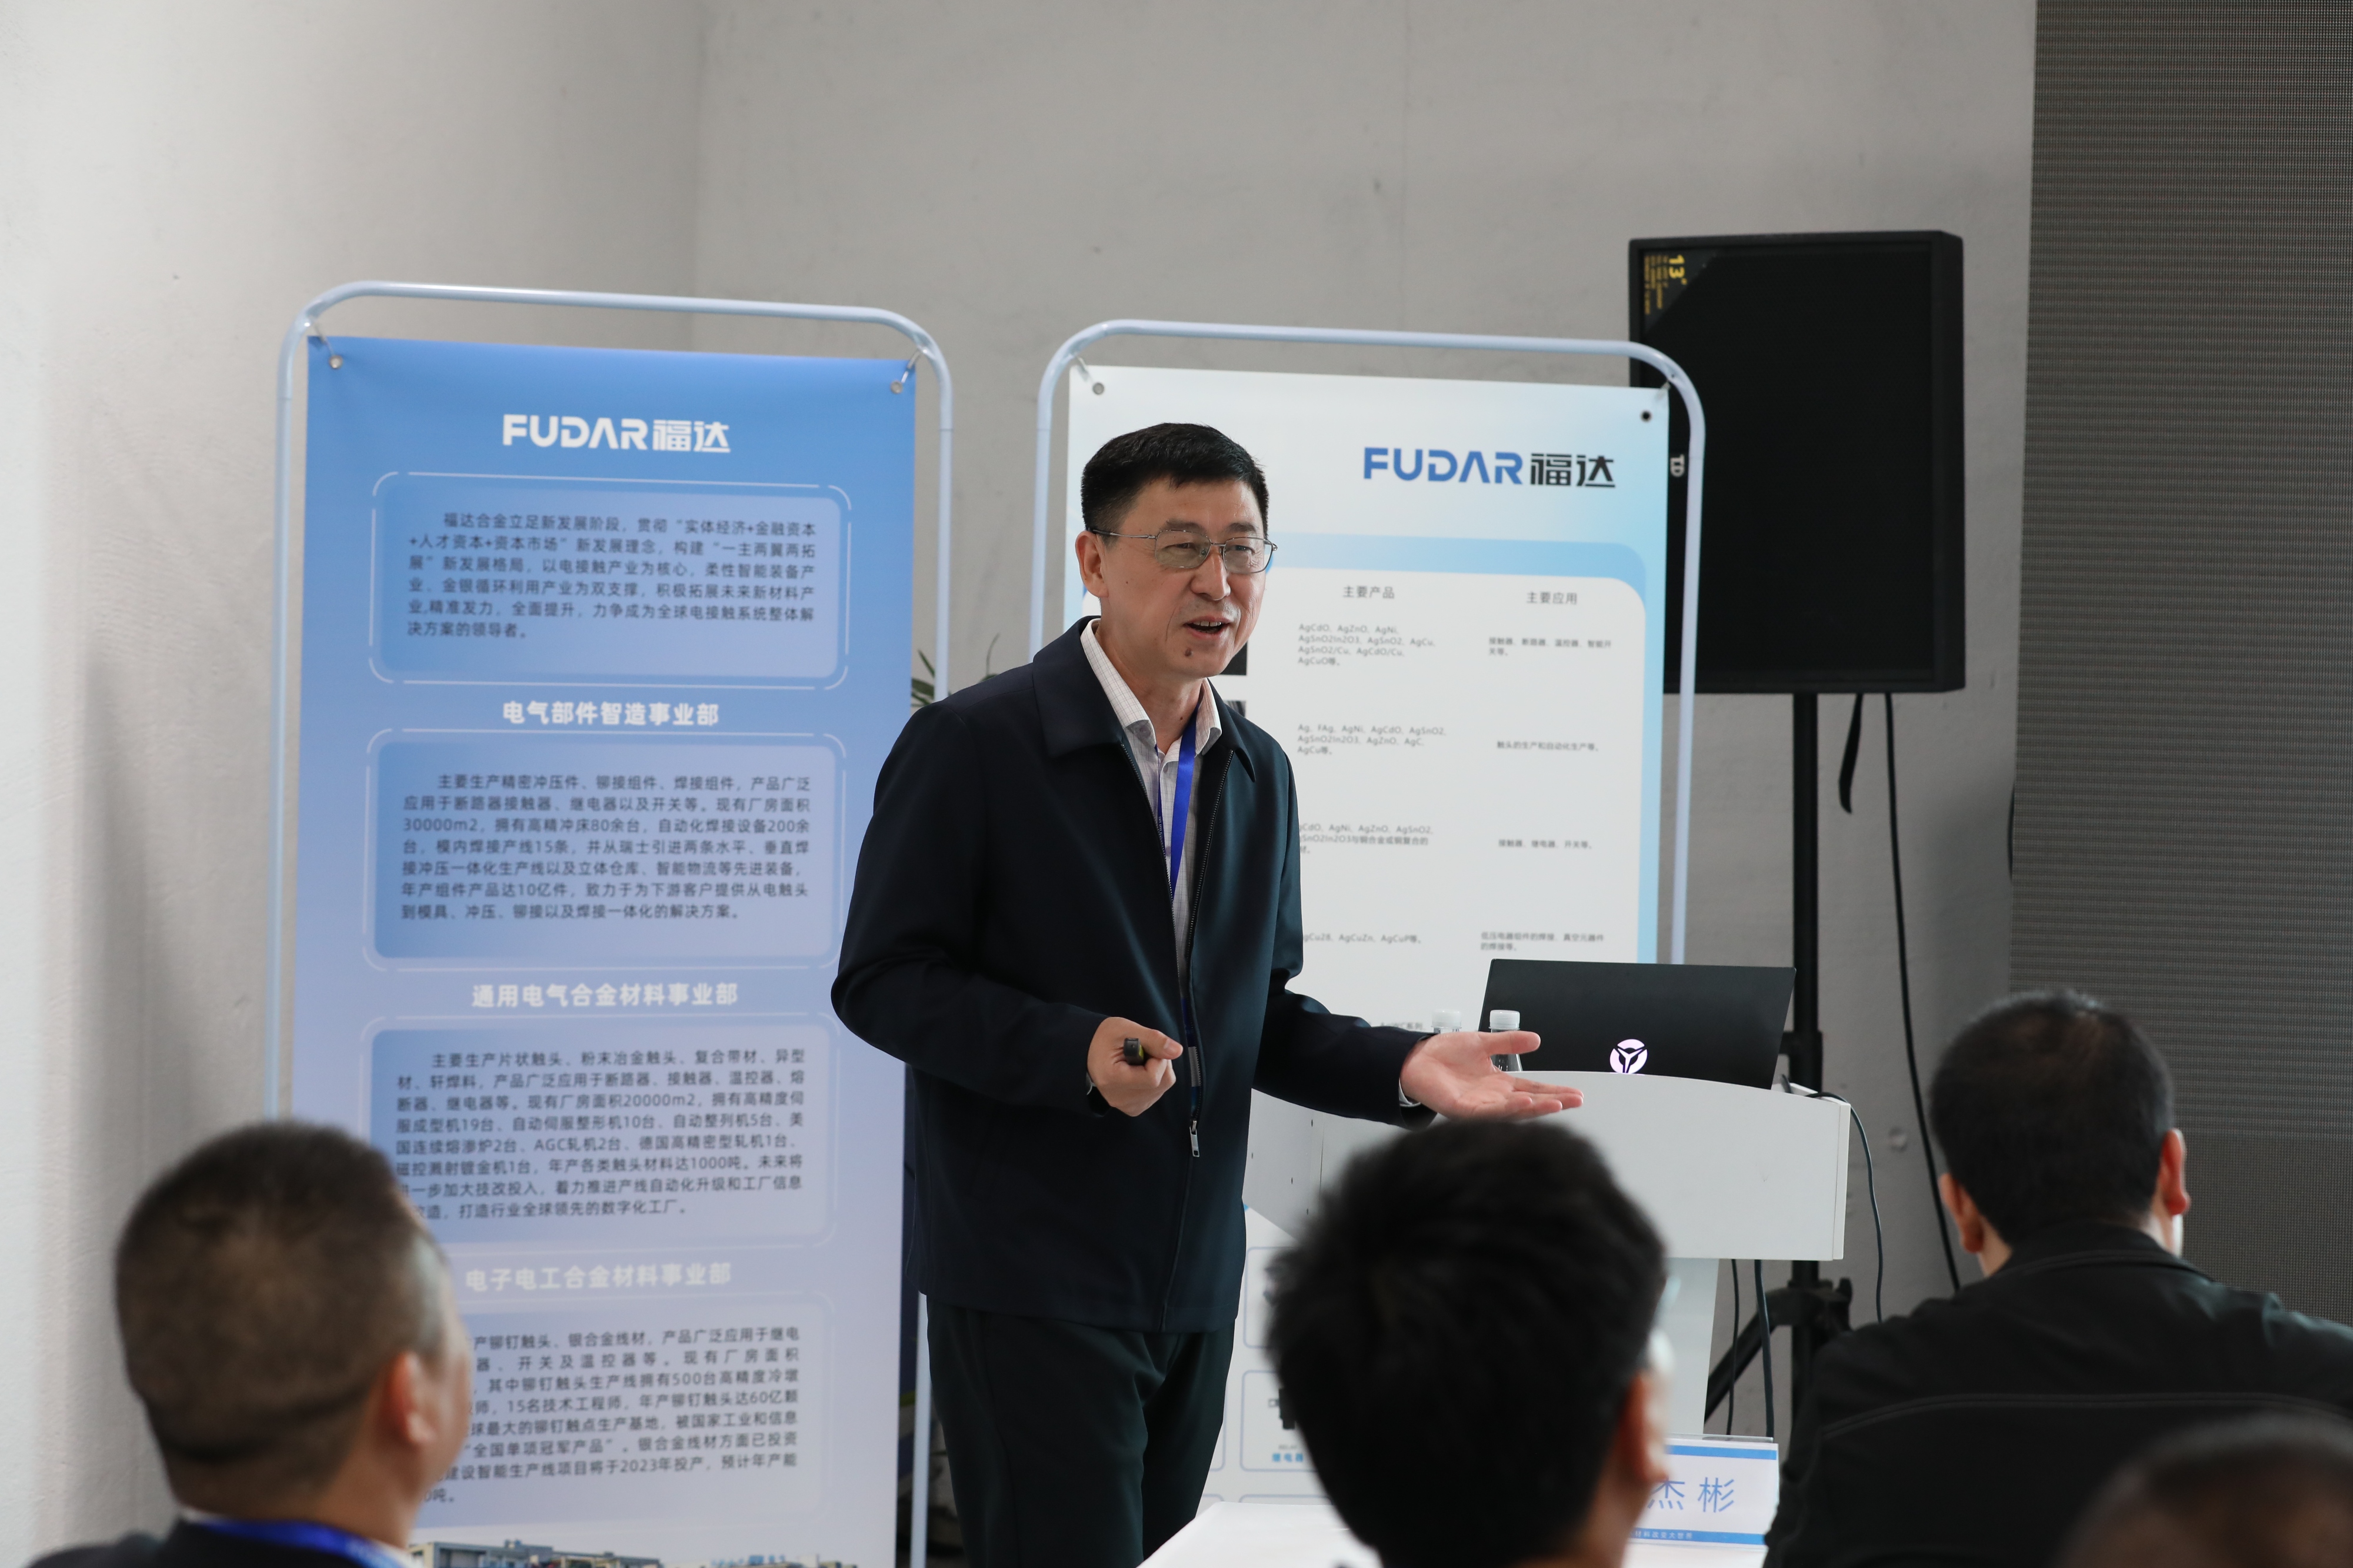 "Research on the Design and Service Performance of Electrical Contact Materials for Low-voltage Electrical Appliances" - Professor Shao Wenzhu, Harbin Institute of Technology